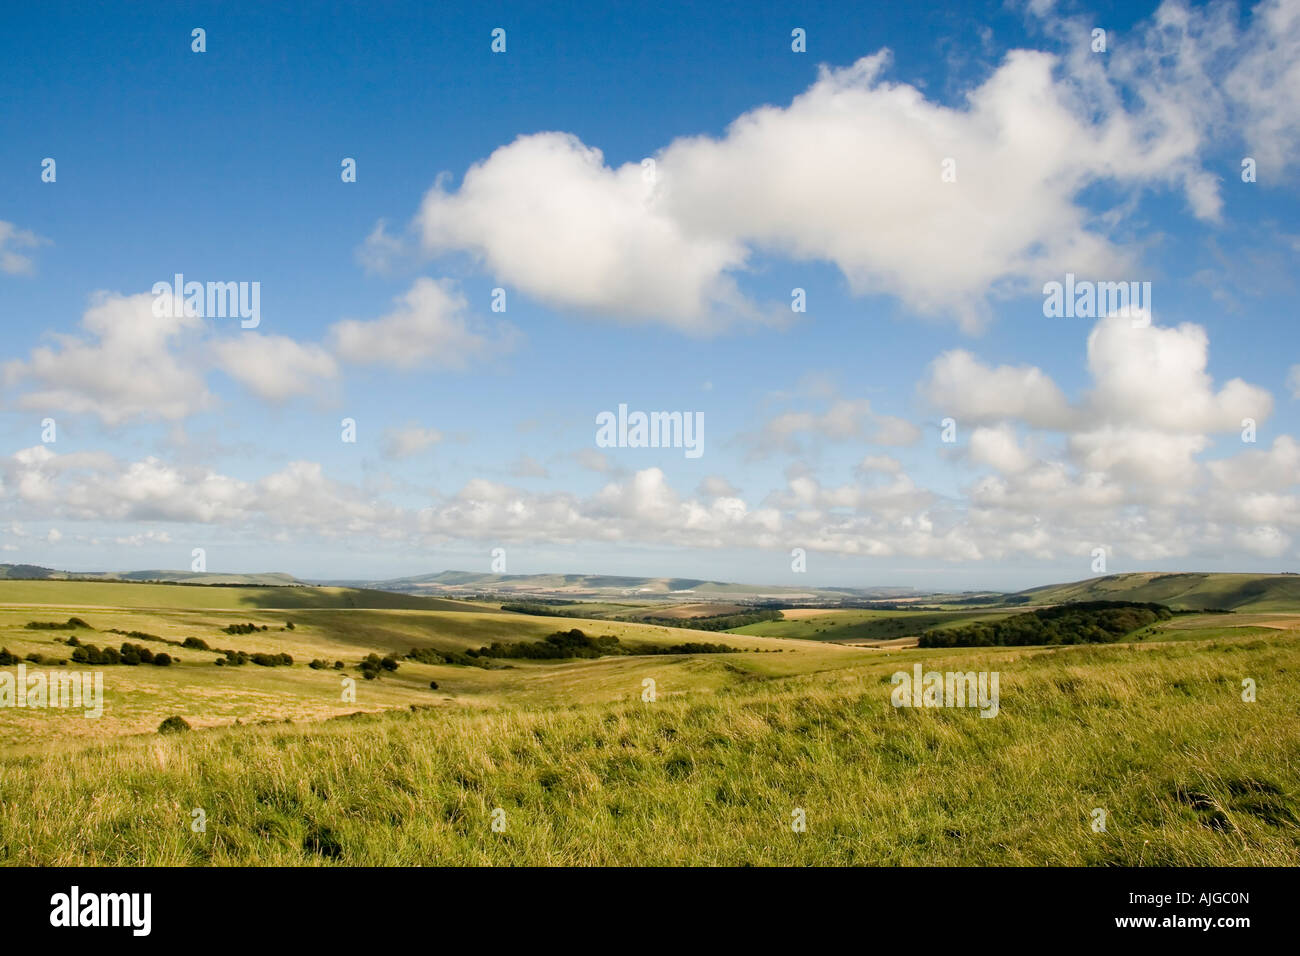 View in summer across the South Downs looking towards Firle Beacon Seaford Head and Kingston Ridge Stock Photo